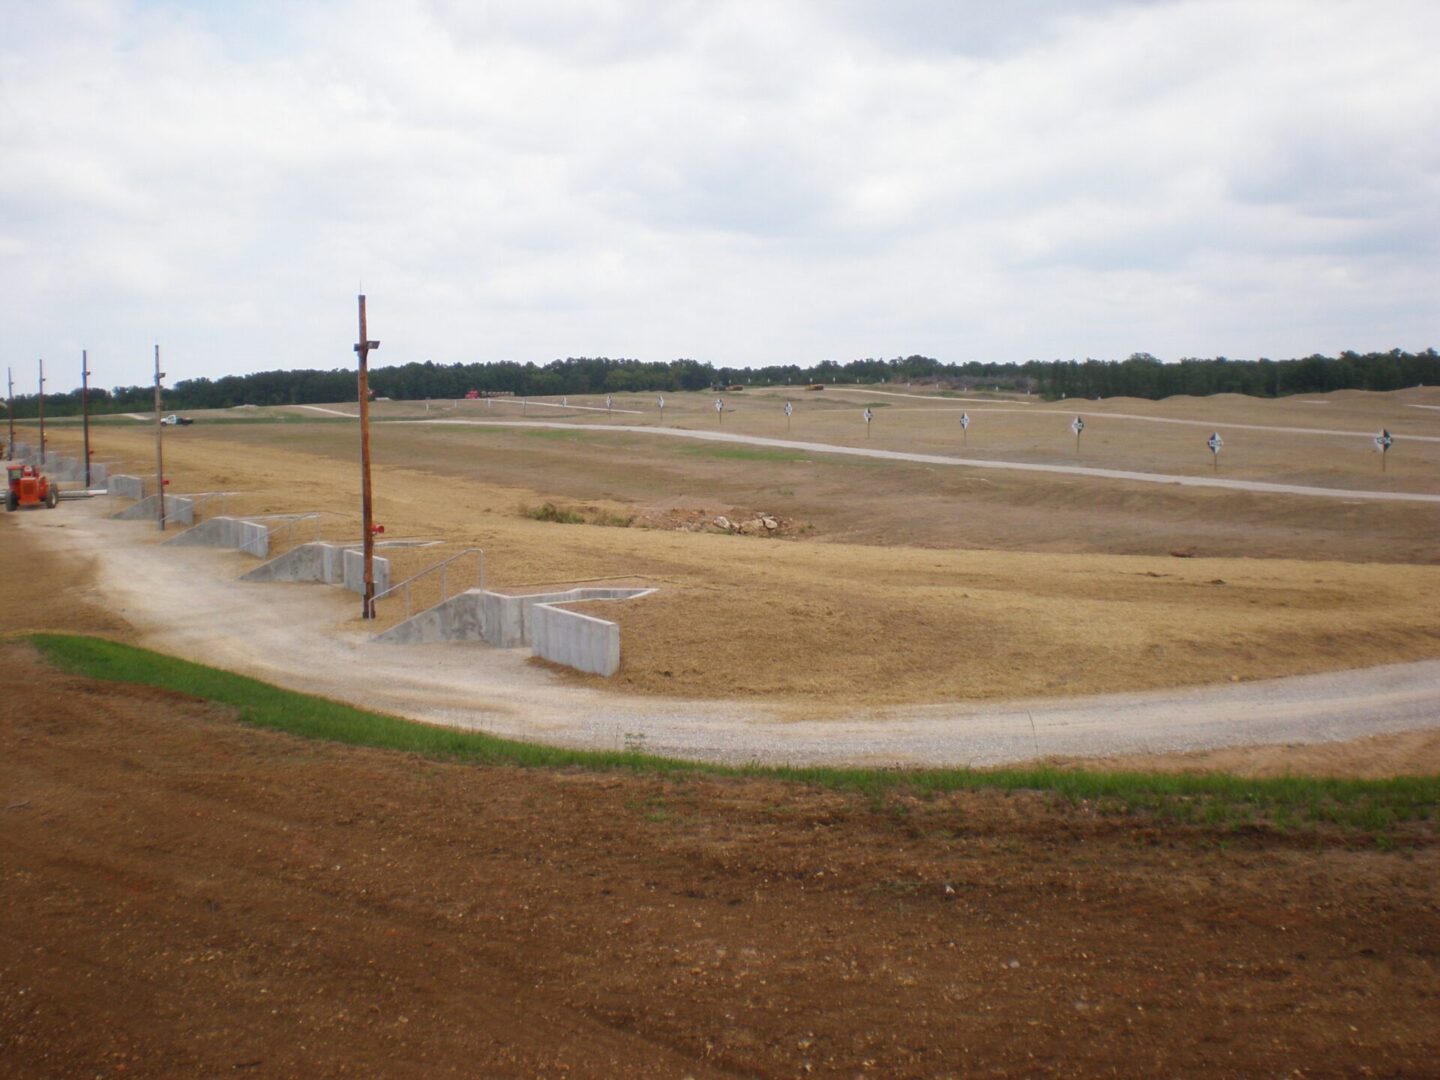 A view of ongoing construction at a large, open site with a curved dirt road, concrete barriers, and utility poles under a cloudy sky.